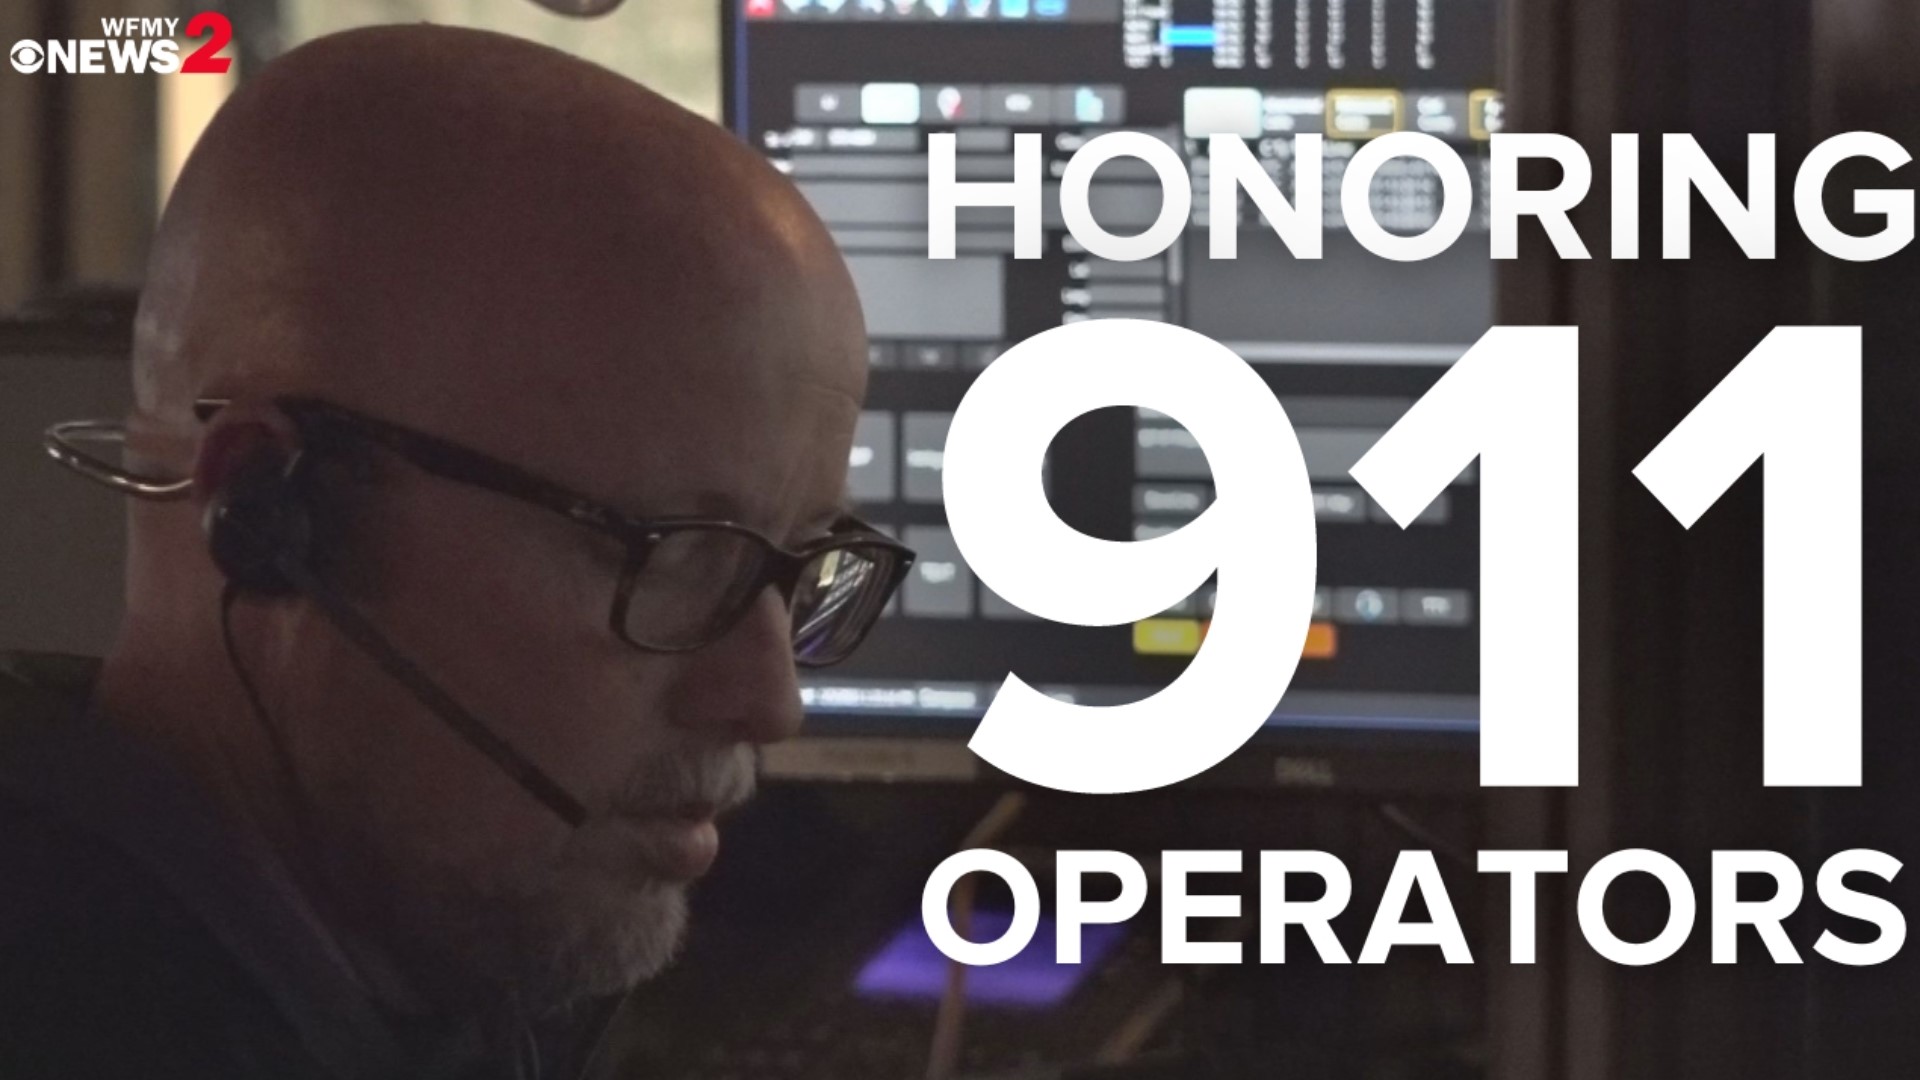 Guilford County honors the 911 operators to kick off National Telecommunications Week.